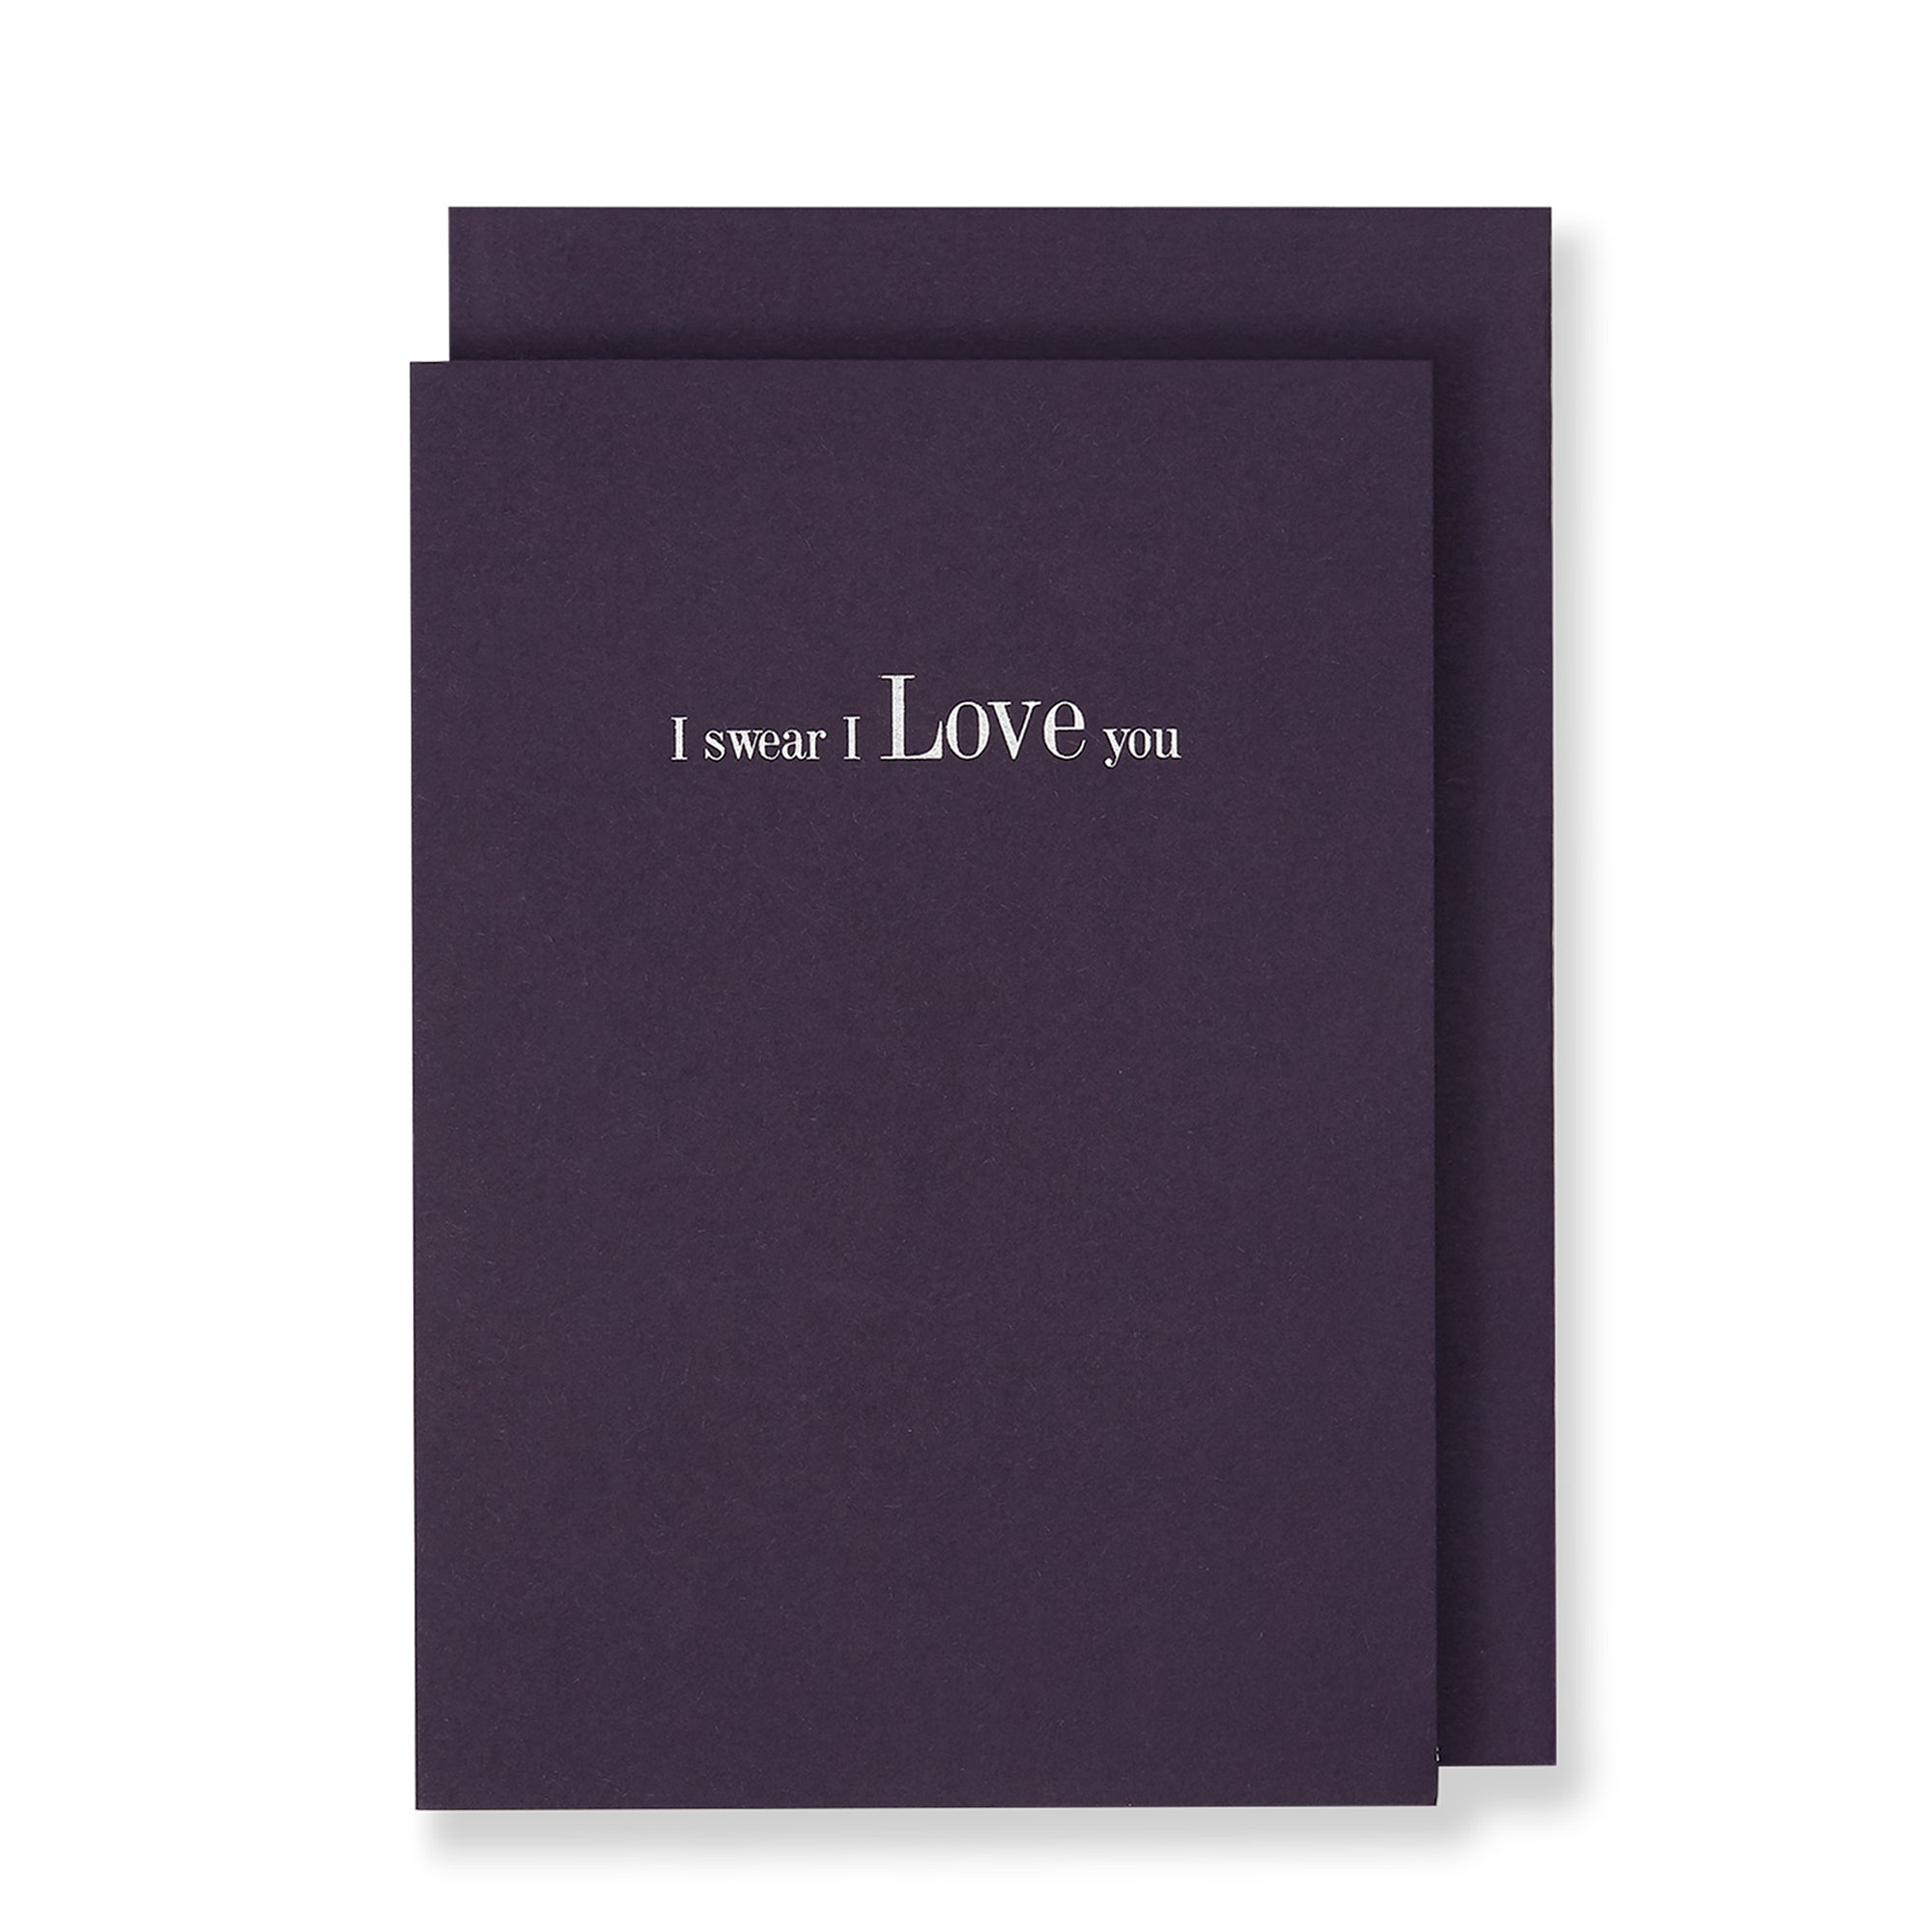 I Swear I Love You Greeting Card in Deep Purple, Front